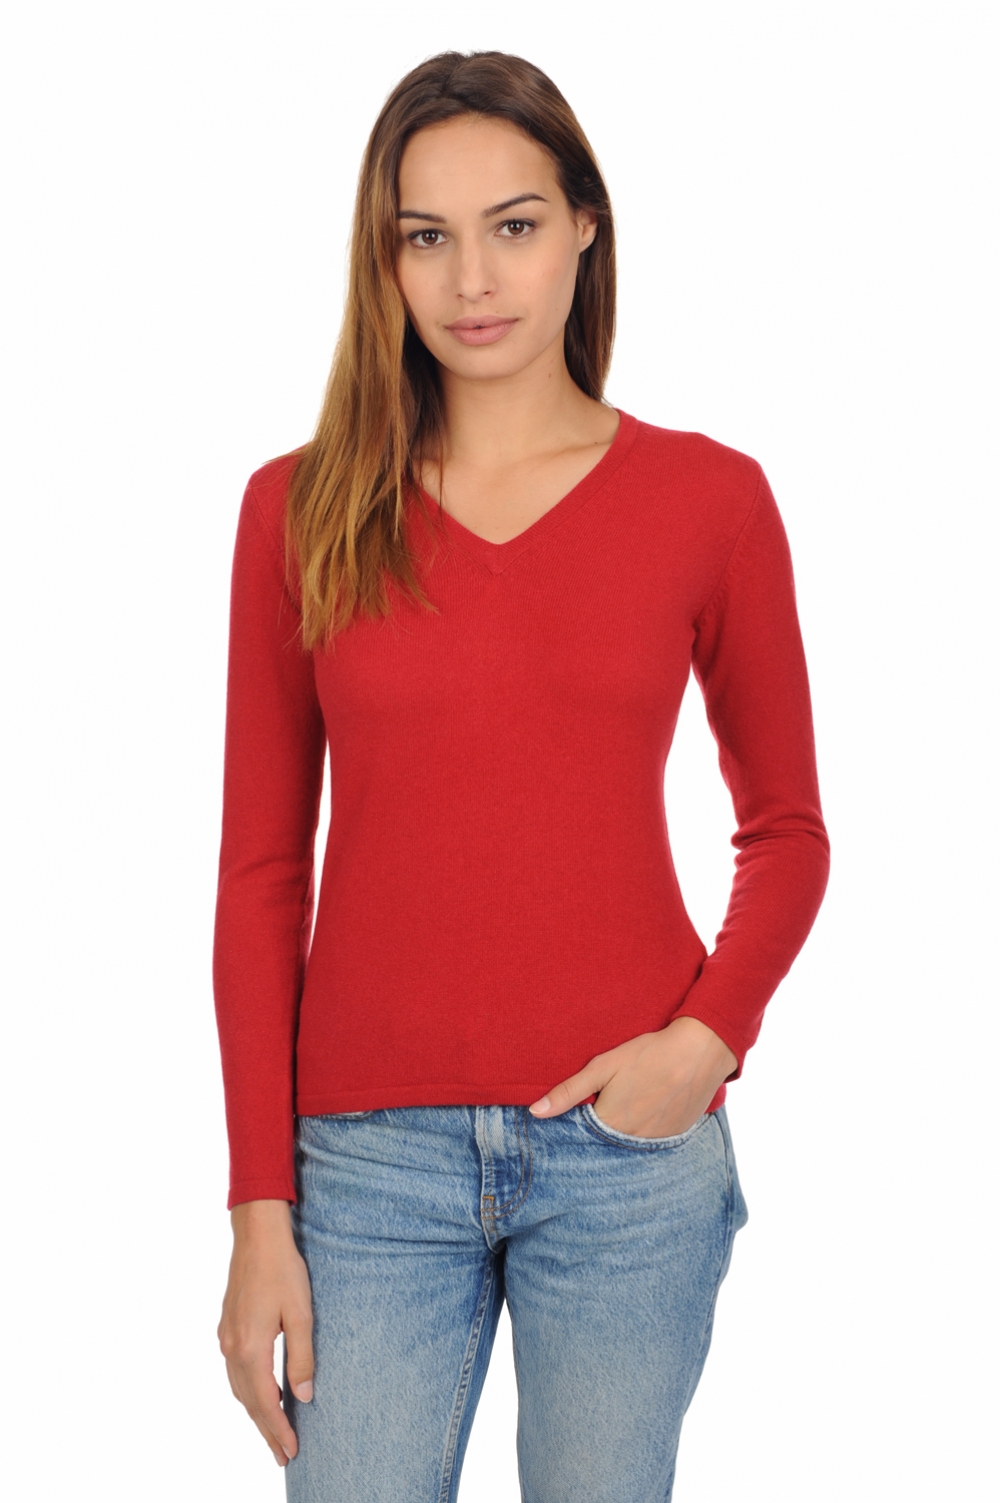 Cashmere ladies timeless classics emma blood red 4xl